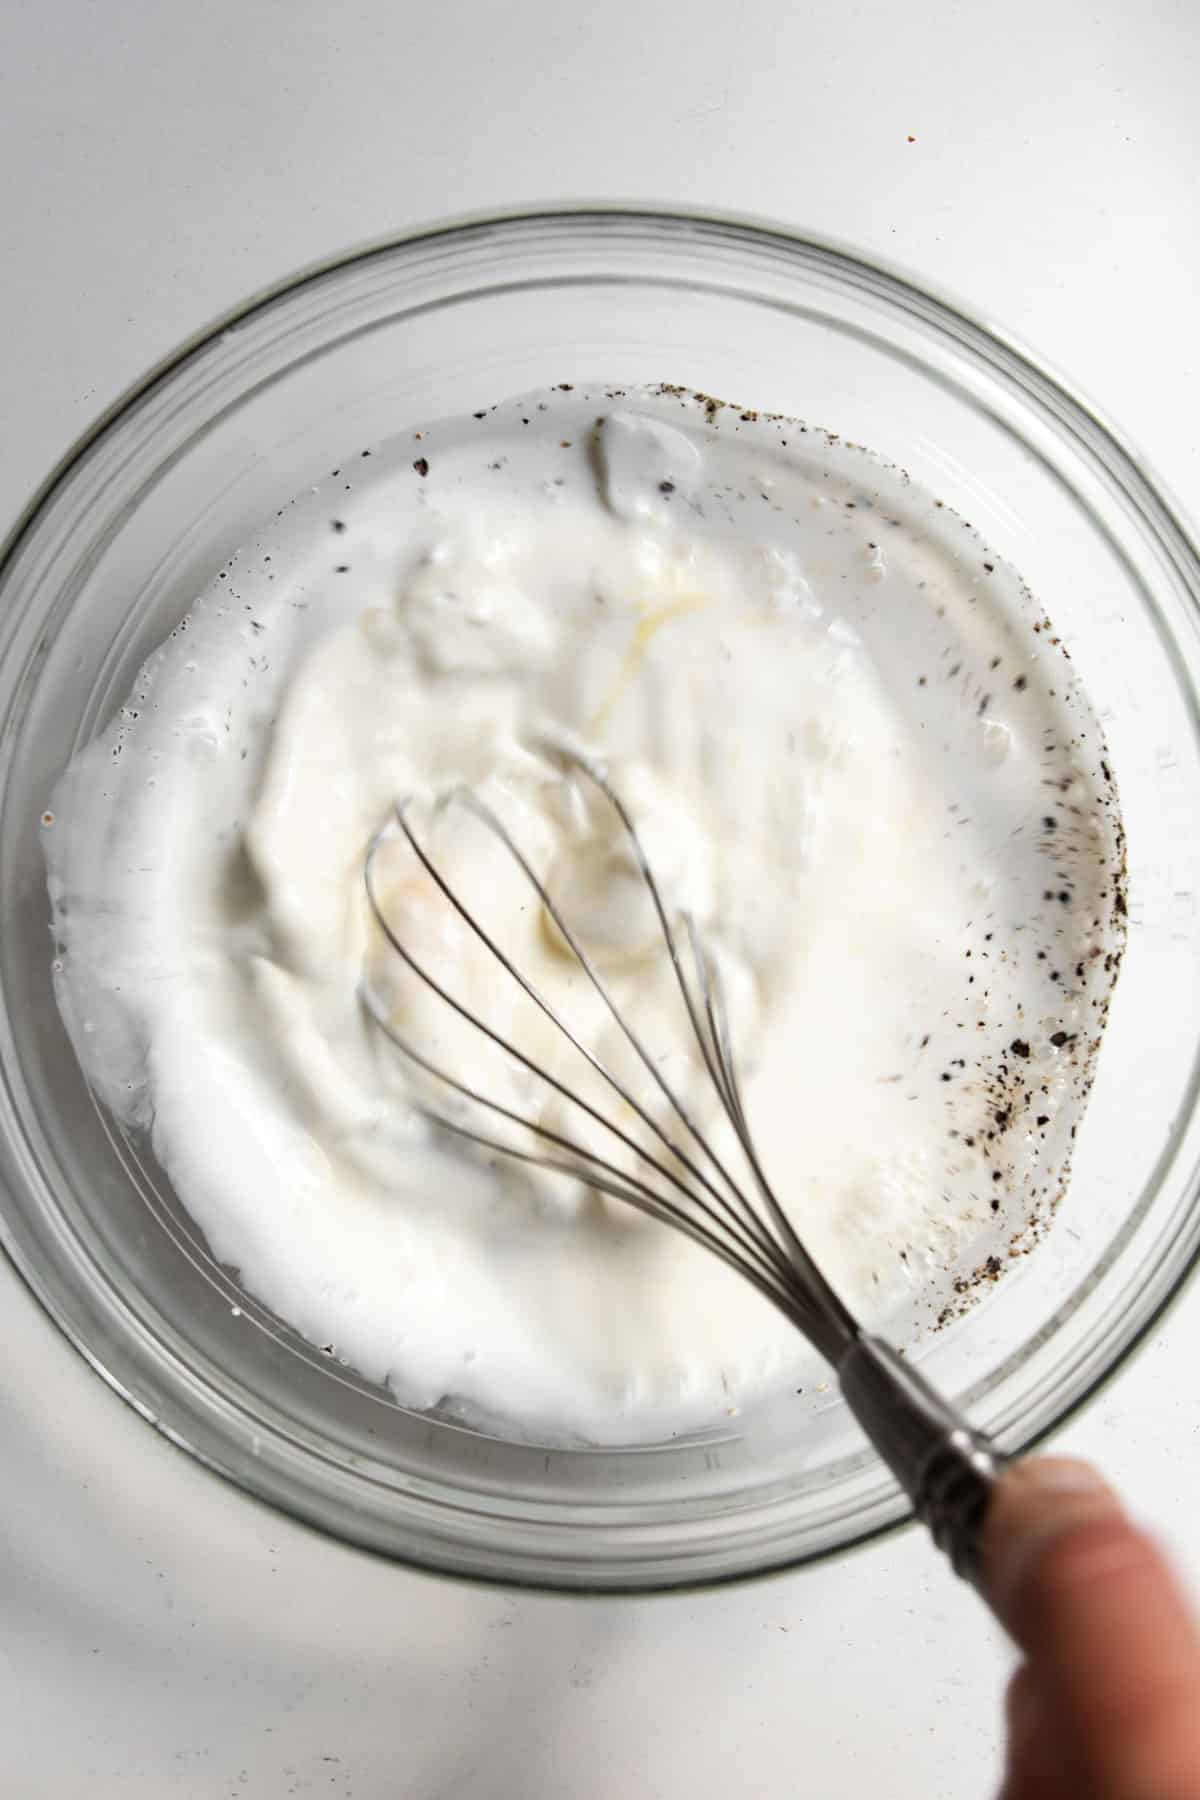 Egg, sour cream, half and half seasoned with salt and pepper in a bowl while being whisked.